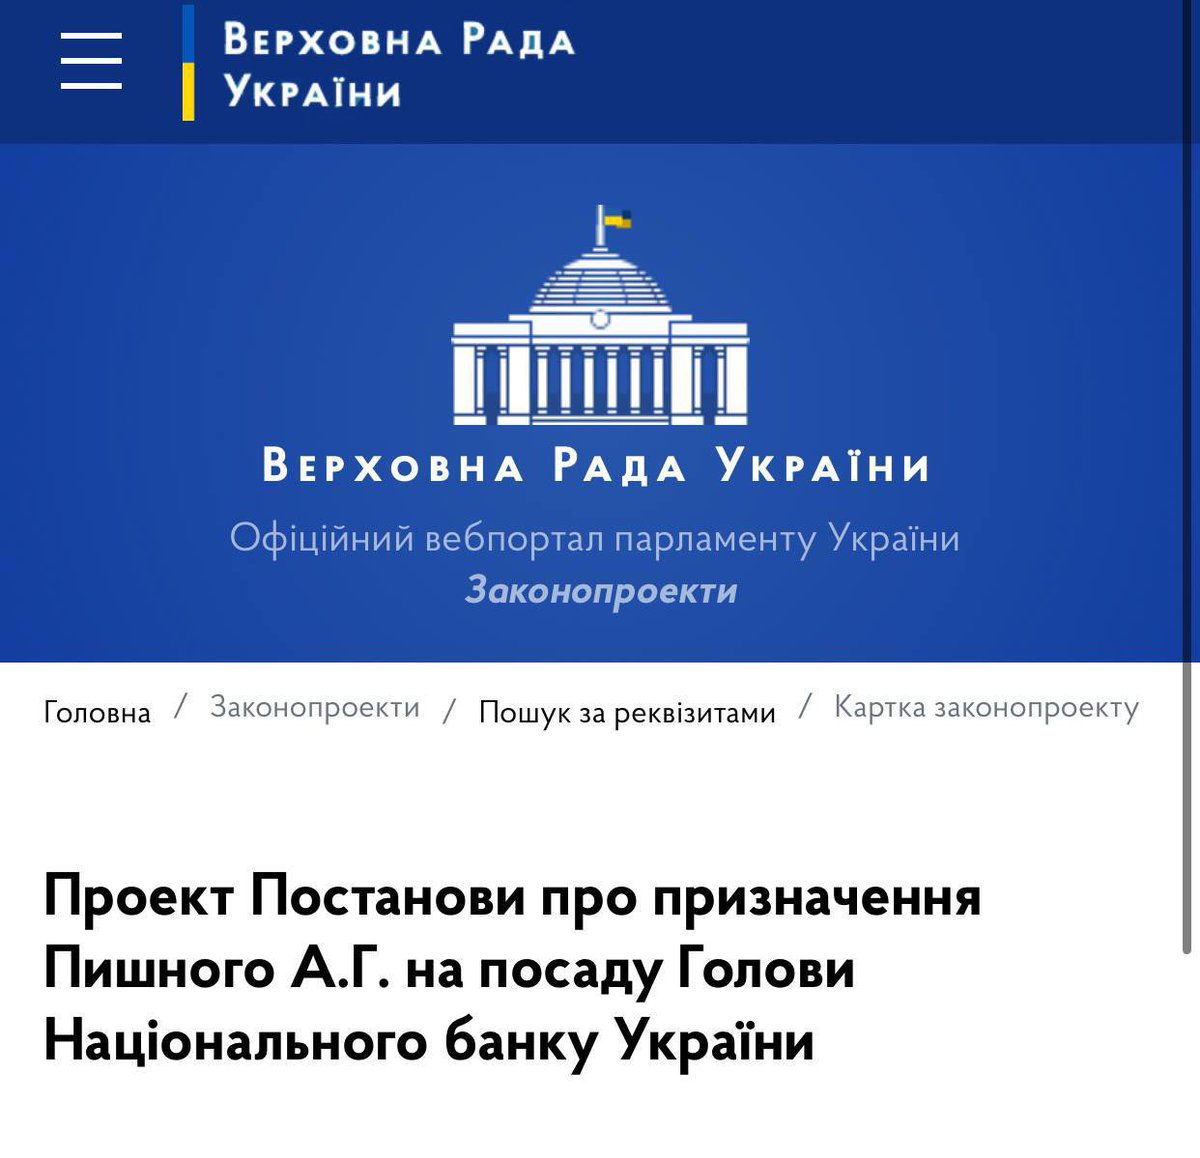 President Zelensky submitted to the Parliament the candidacy of Andrii Pyshnyi for the post of head of the National Bank of Ukraine